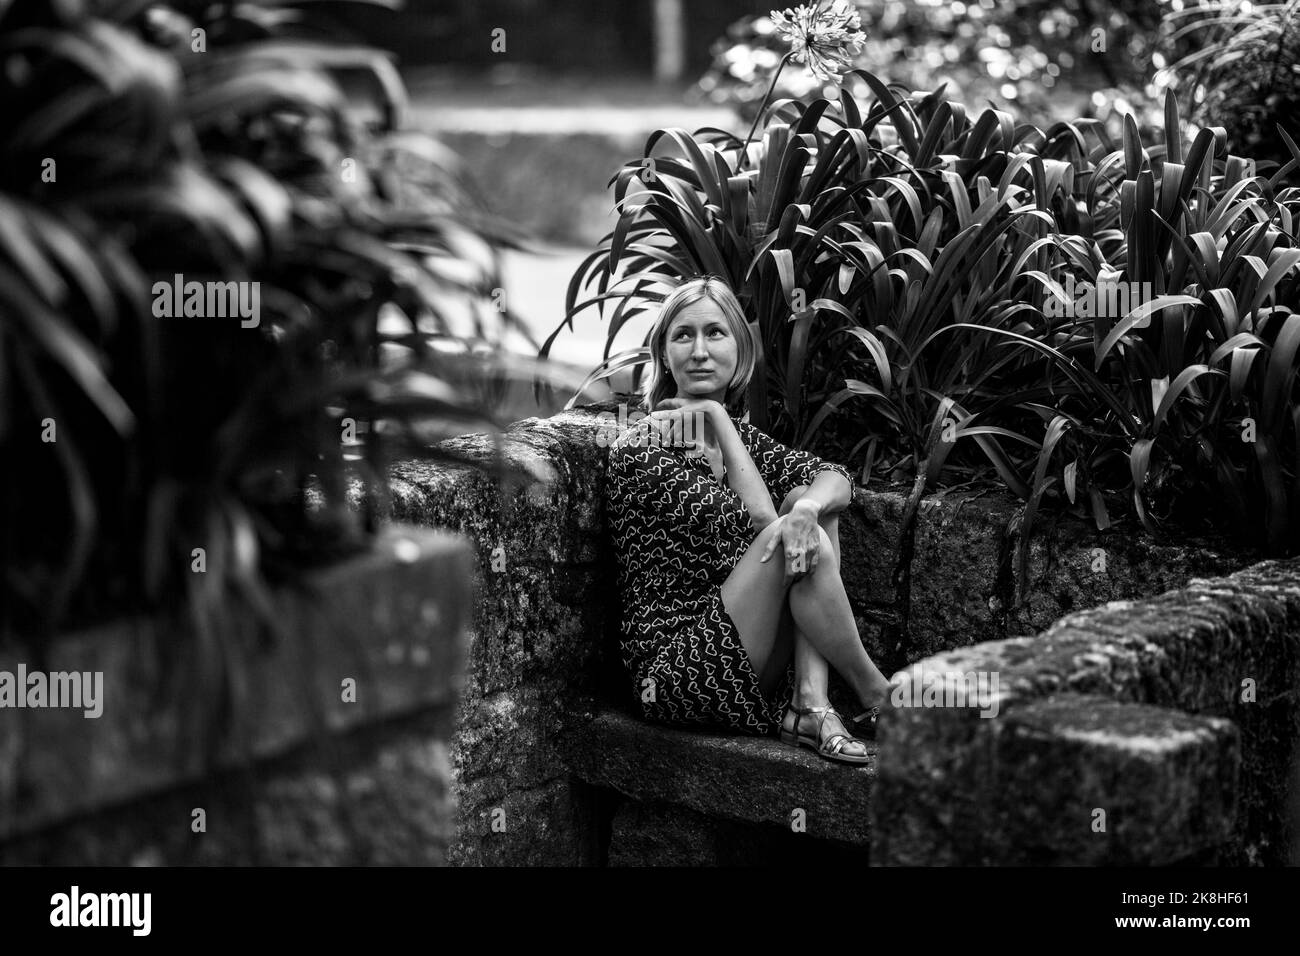 A woman sitting on a stone bench in an old park. Black and white photograph. Stock Photo